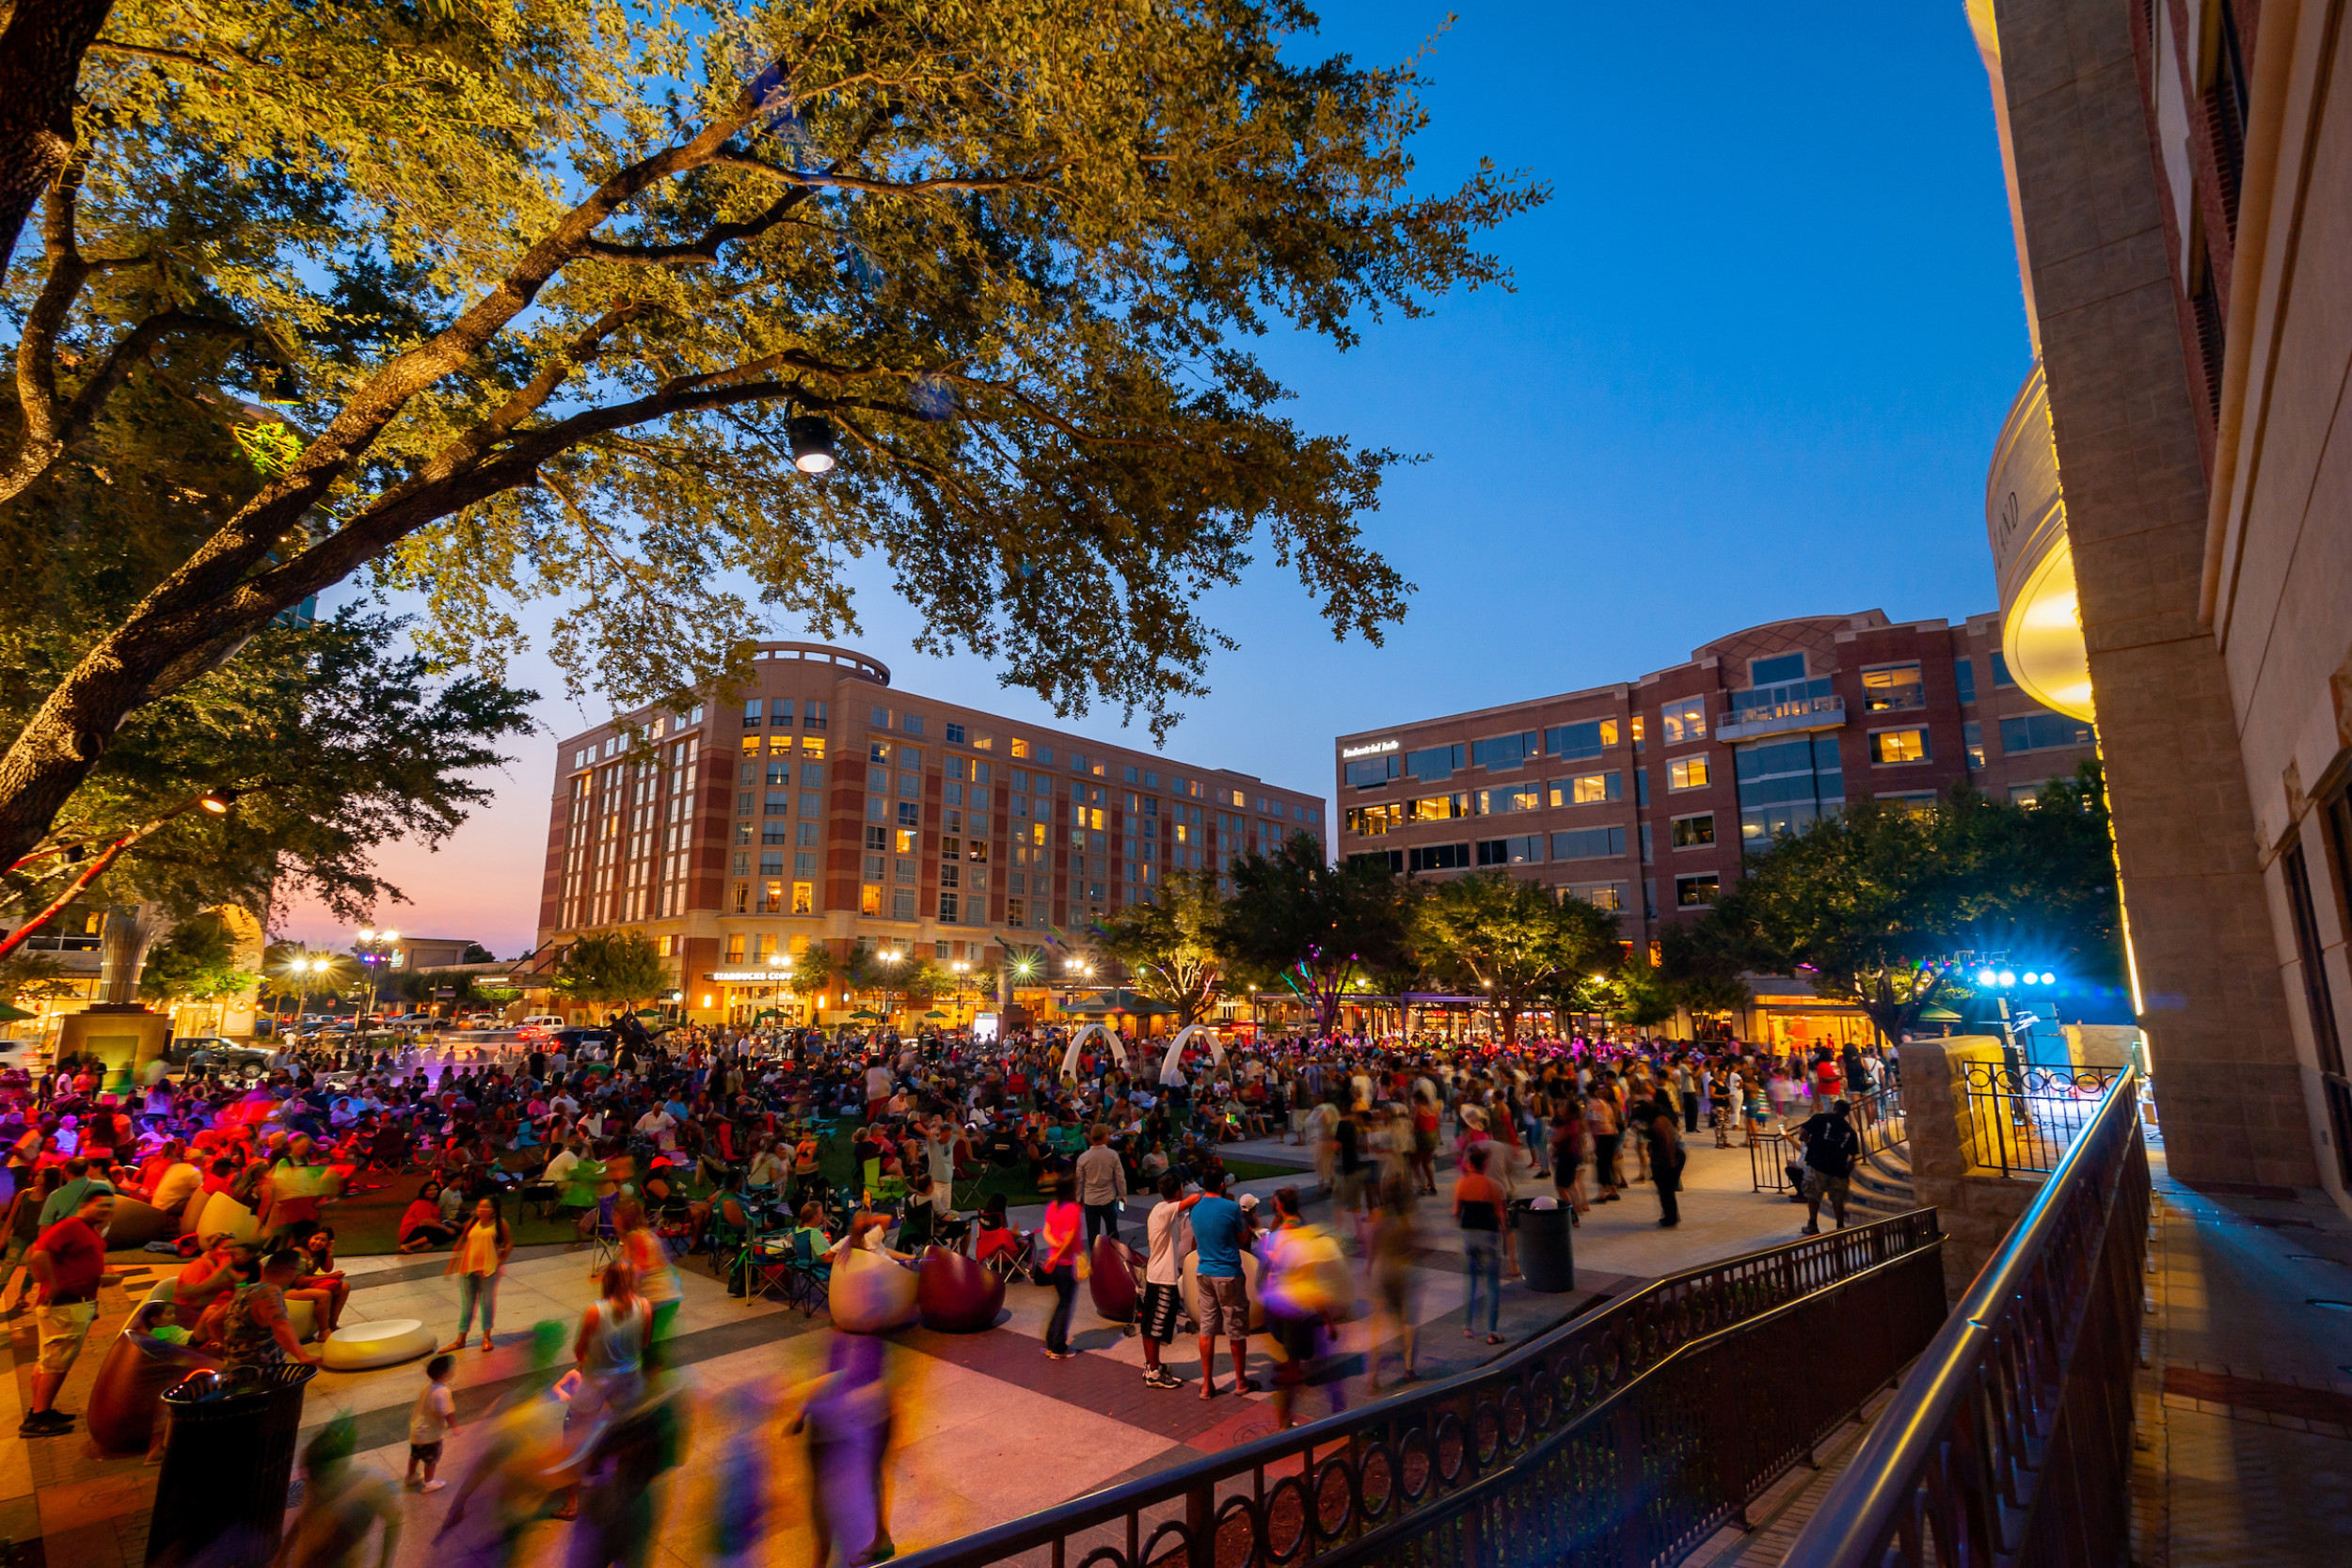 Sugar Land Town Square event at night